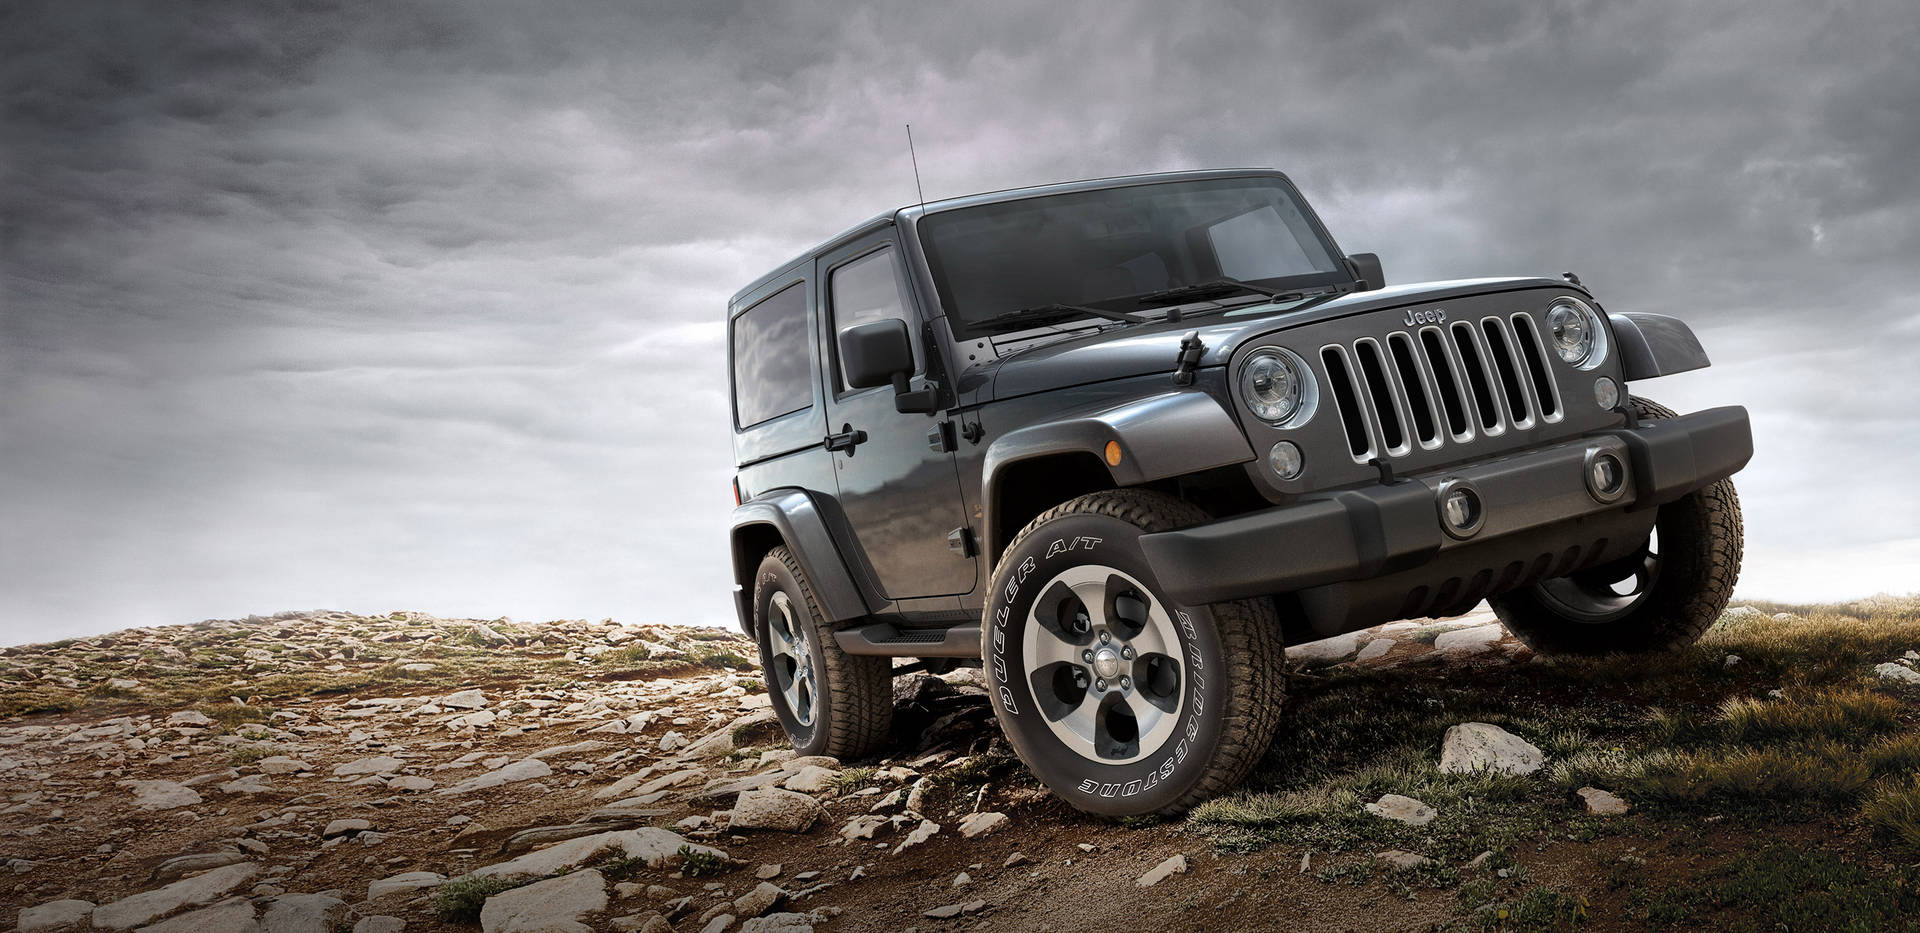 Majestic Black Jeep Wrangler highlighted by a striking silver logo Wallpaper